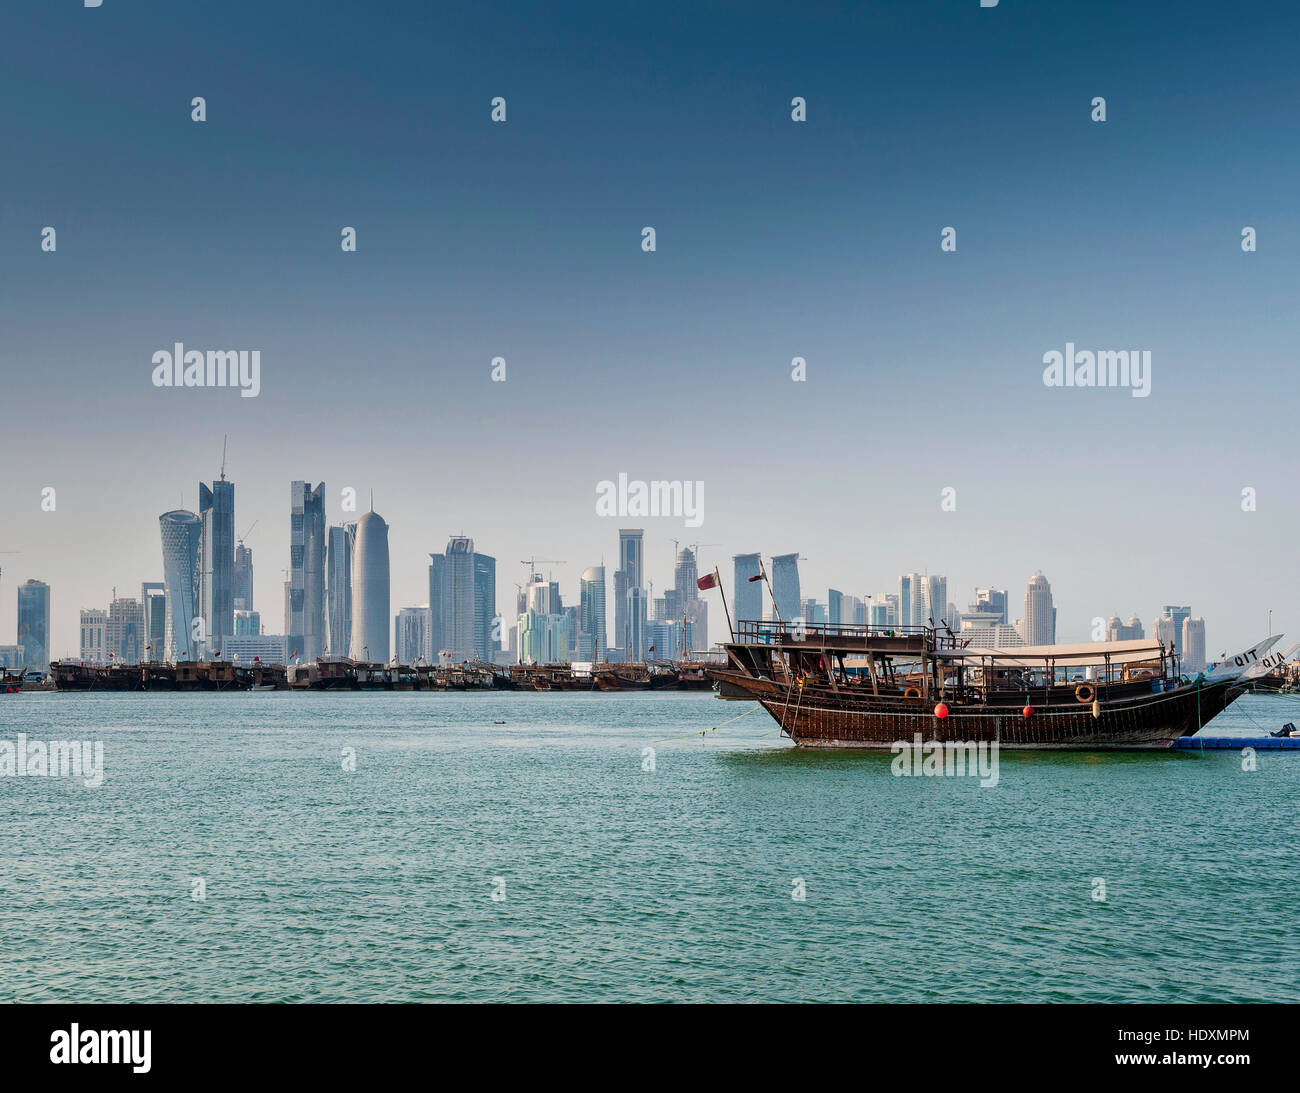 doha city skyscrapers urban skyline view and dhow boat in qatar Stock Photo